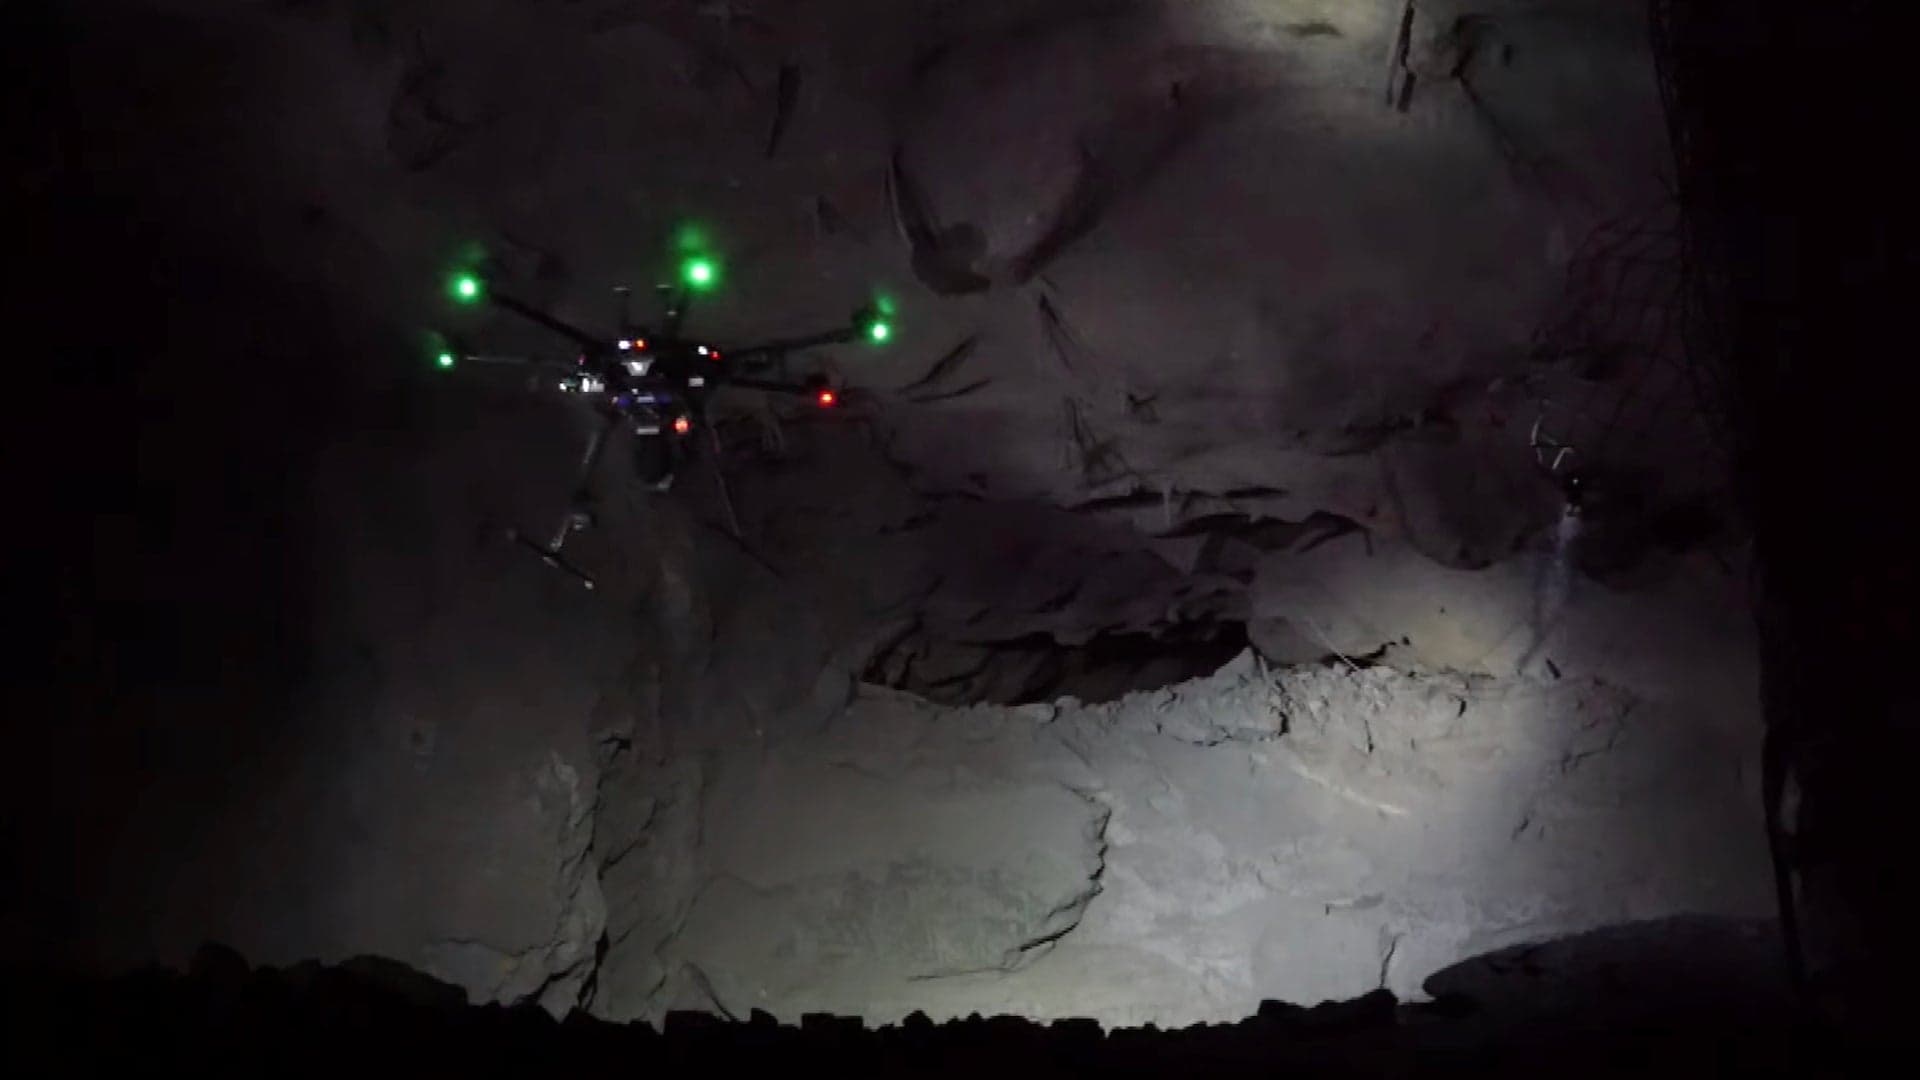 Drone Startup Emesent Secures $2.5M in Funding to Map Underground Mines Without GPS